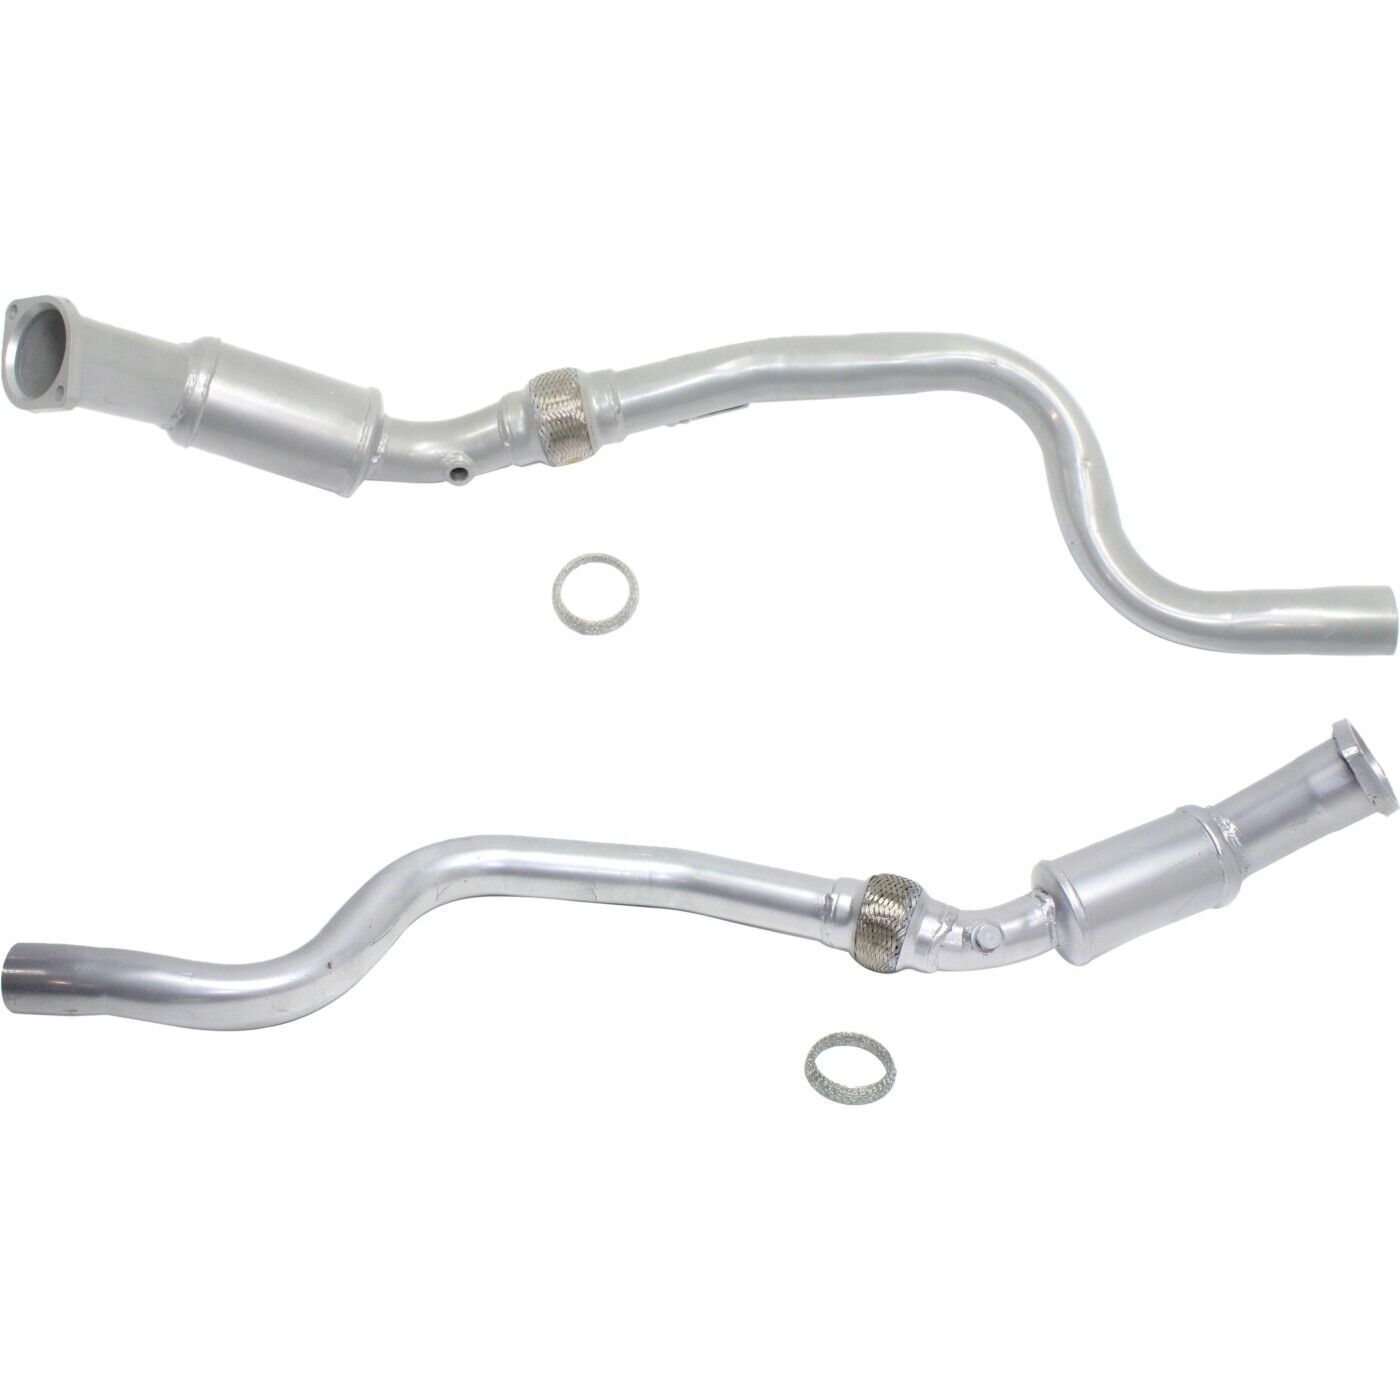 Evan Fischer Catalytic Converter Set for 05-07 Magnum, 06-07 Charger, LH and RH